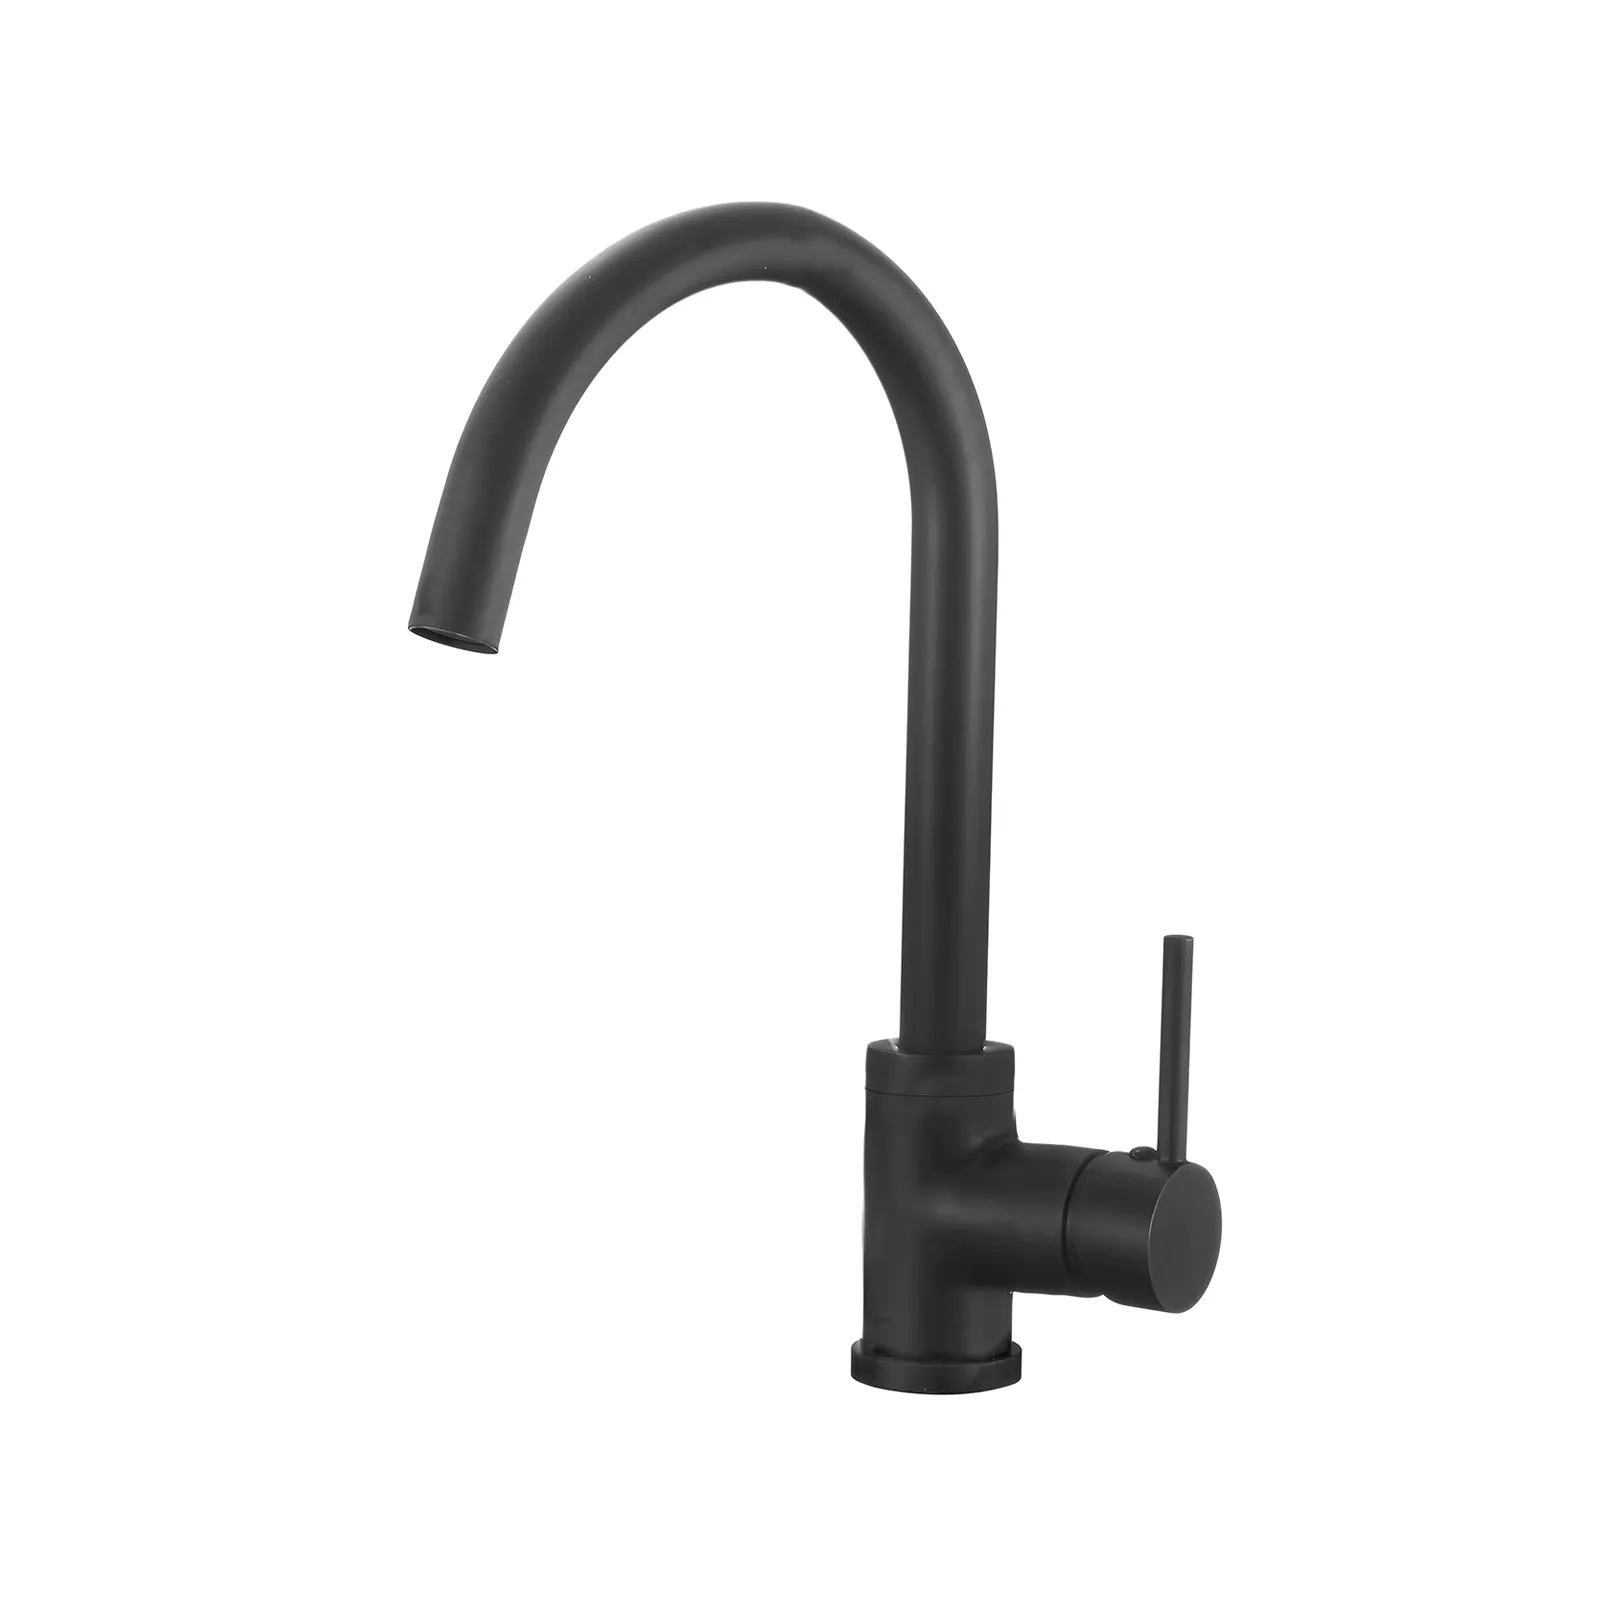 Faucet Side Spray Head Single Lever Sink Mixer Tap 360 Rotation Hot Cold Water Kitchen Sink Faucet